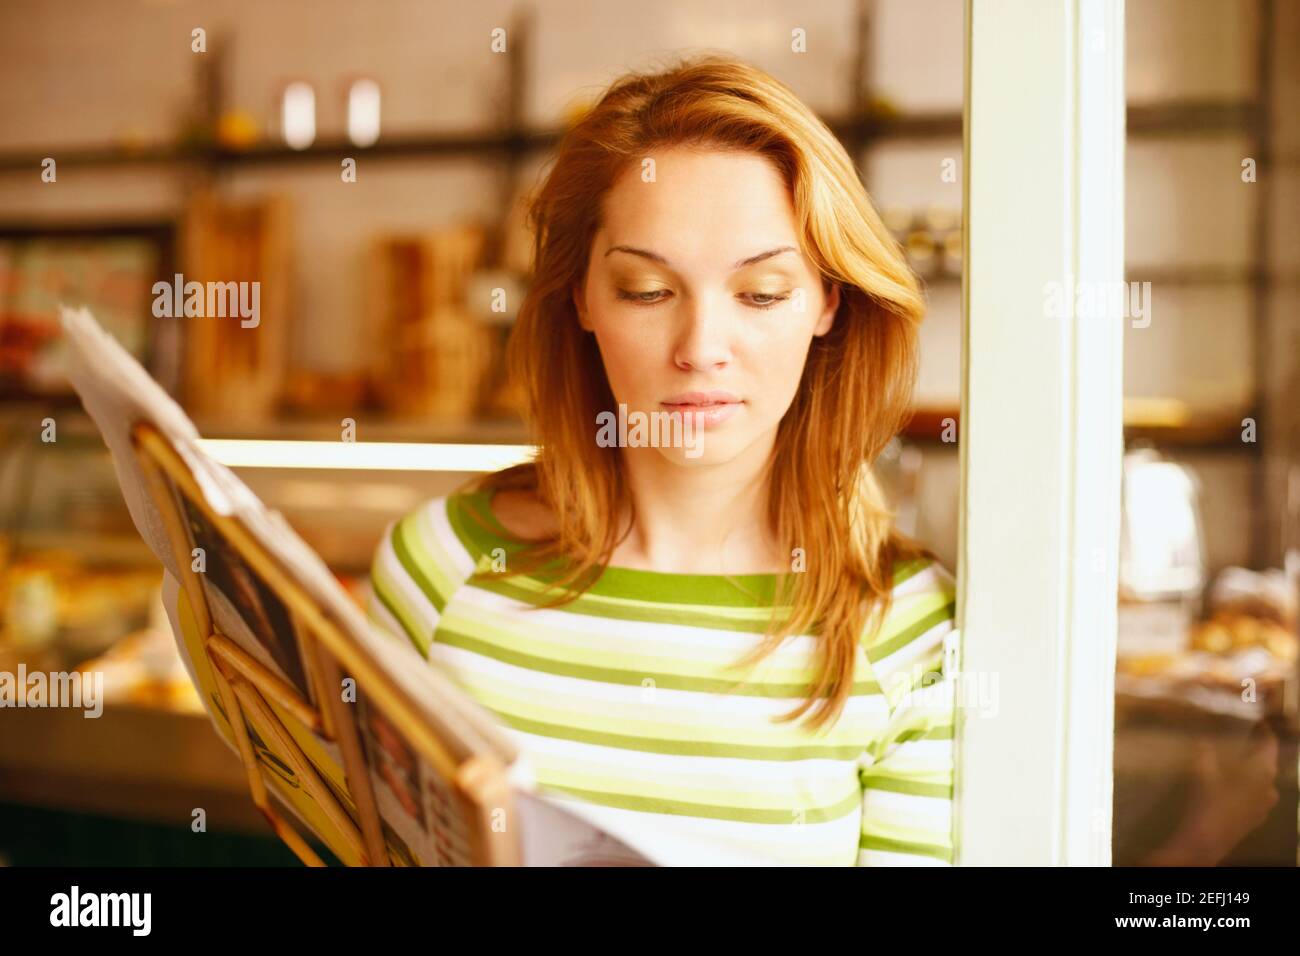 Close-up of a young woman reading a menu card Stock Photo